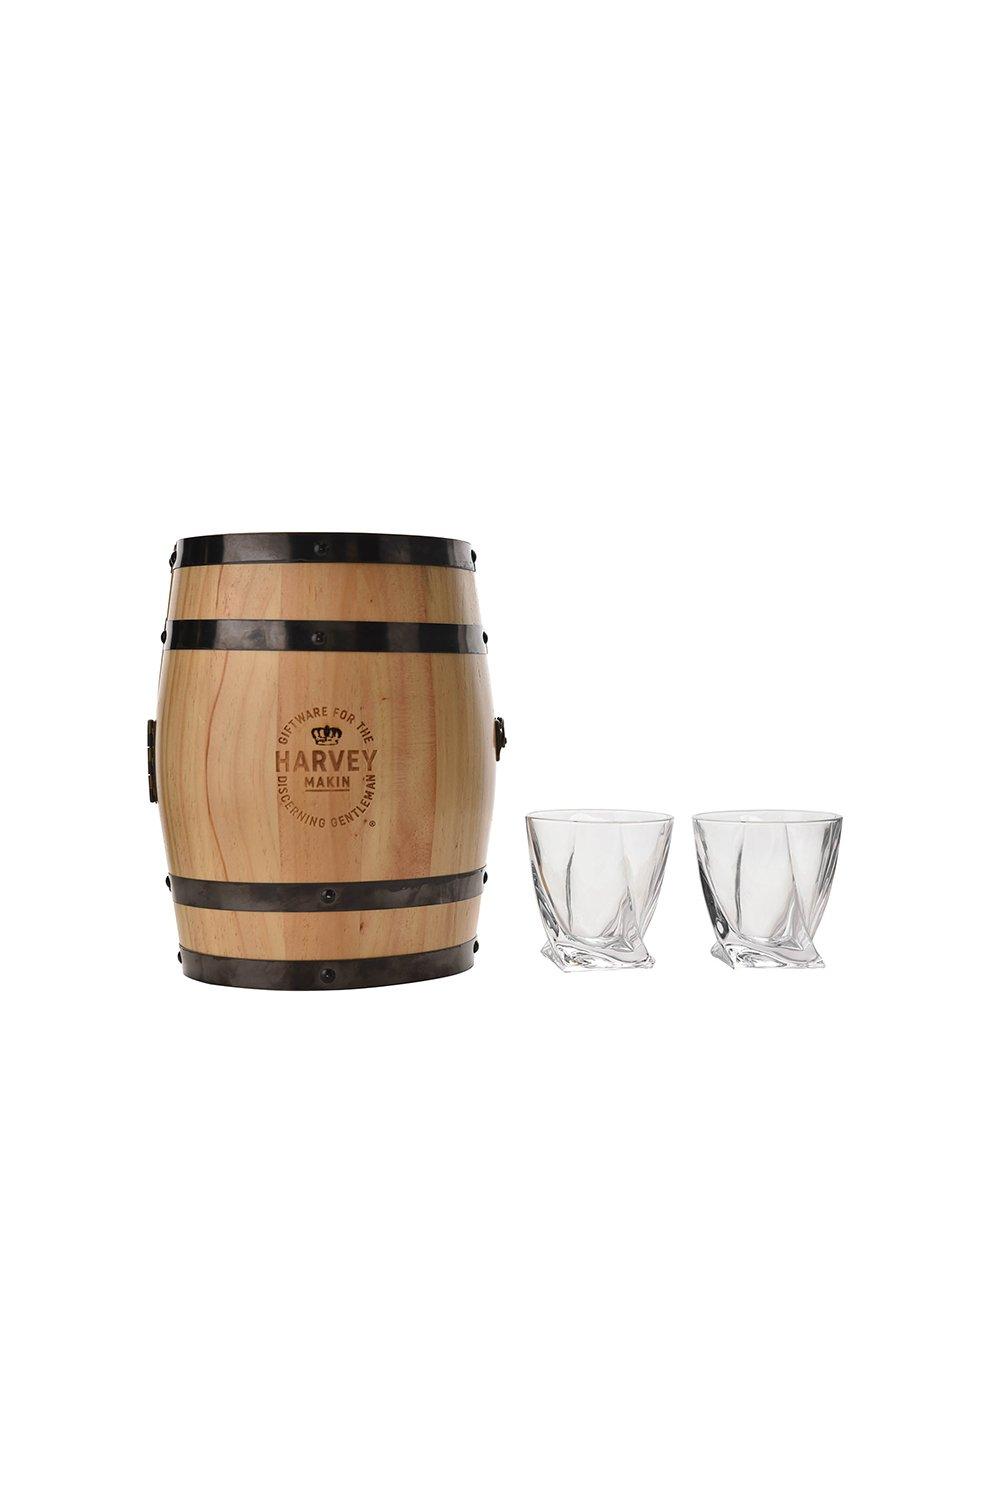 10oz Whiskey Glasses in Rustic Wooden Cask